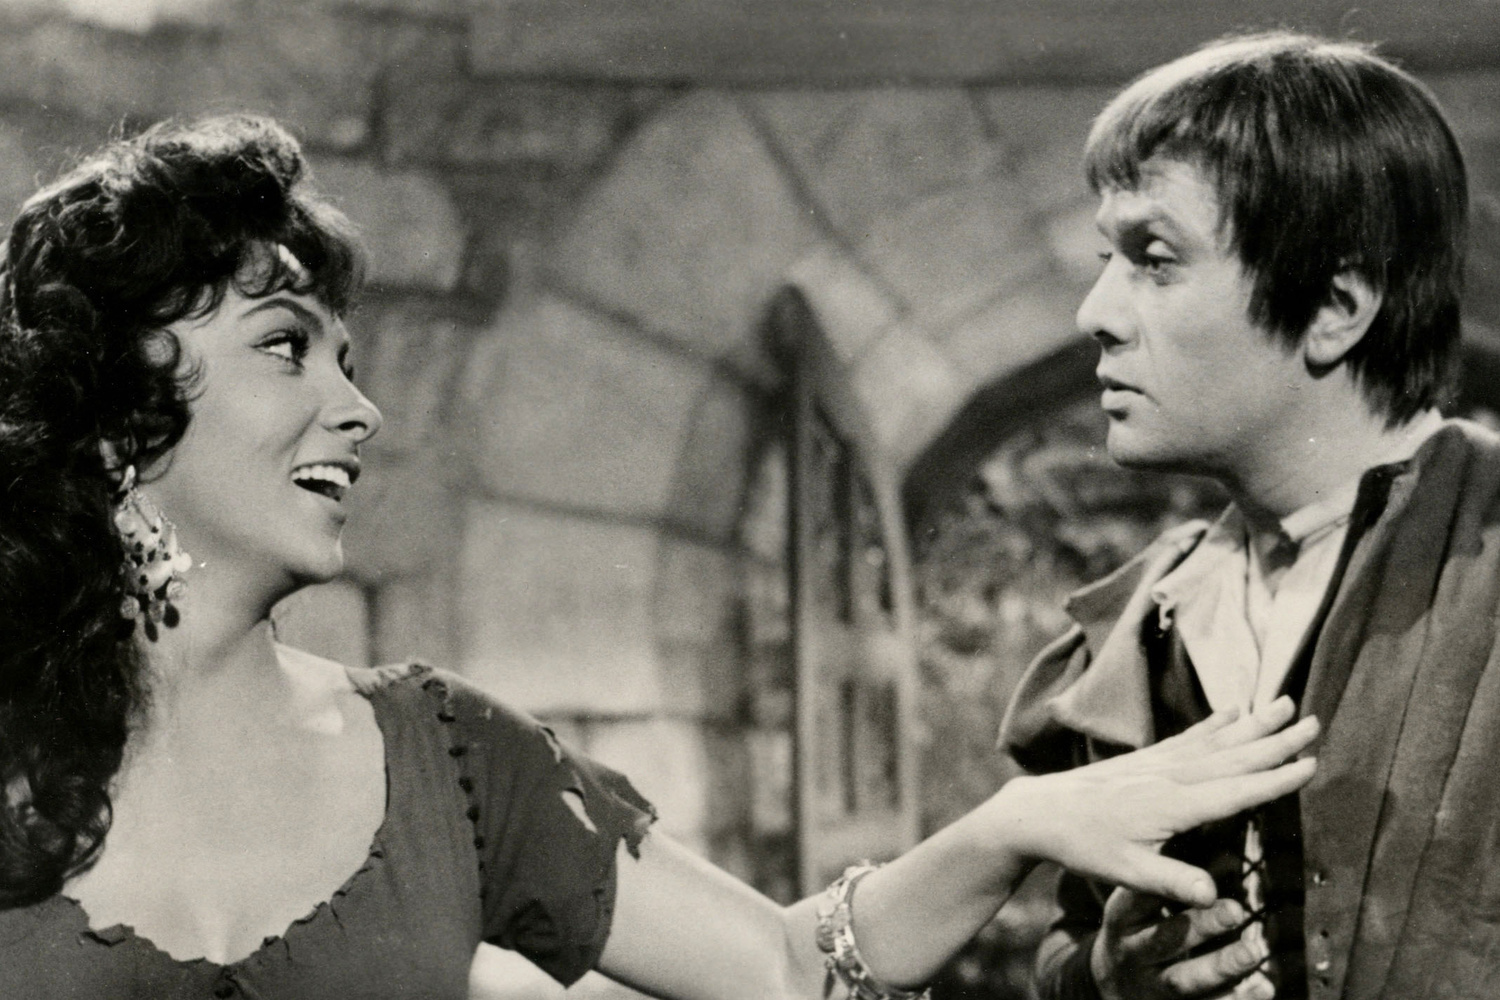 The Hunchback of Notre Dame. 1956. Directed by Jean Delannoy